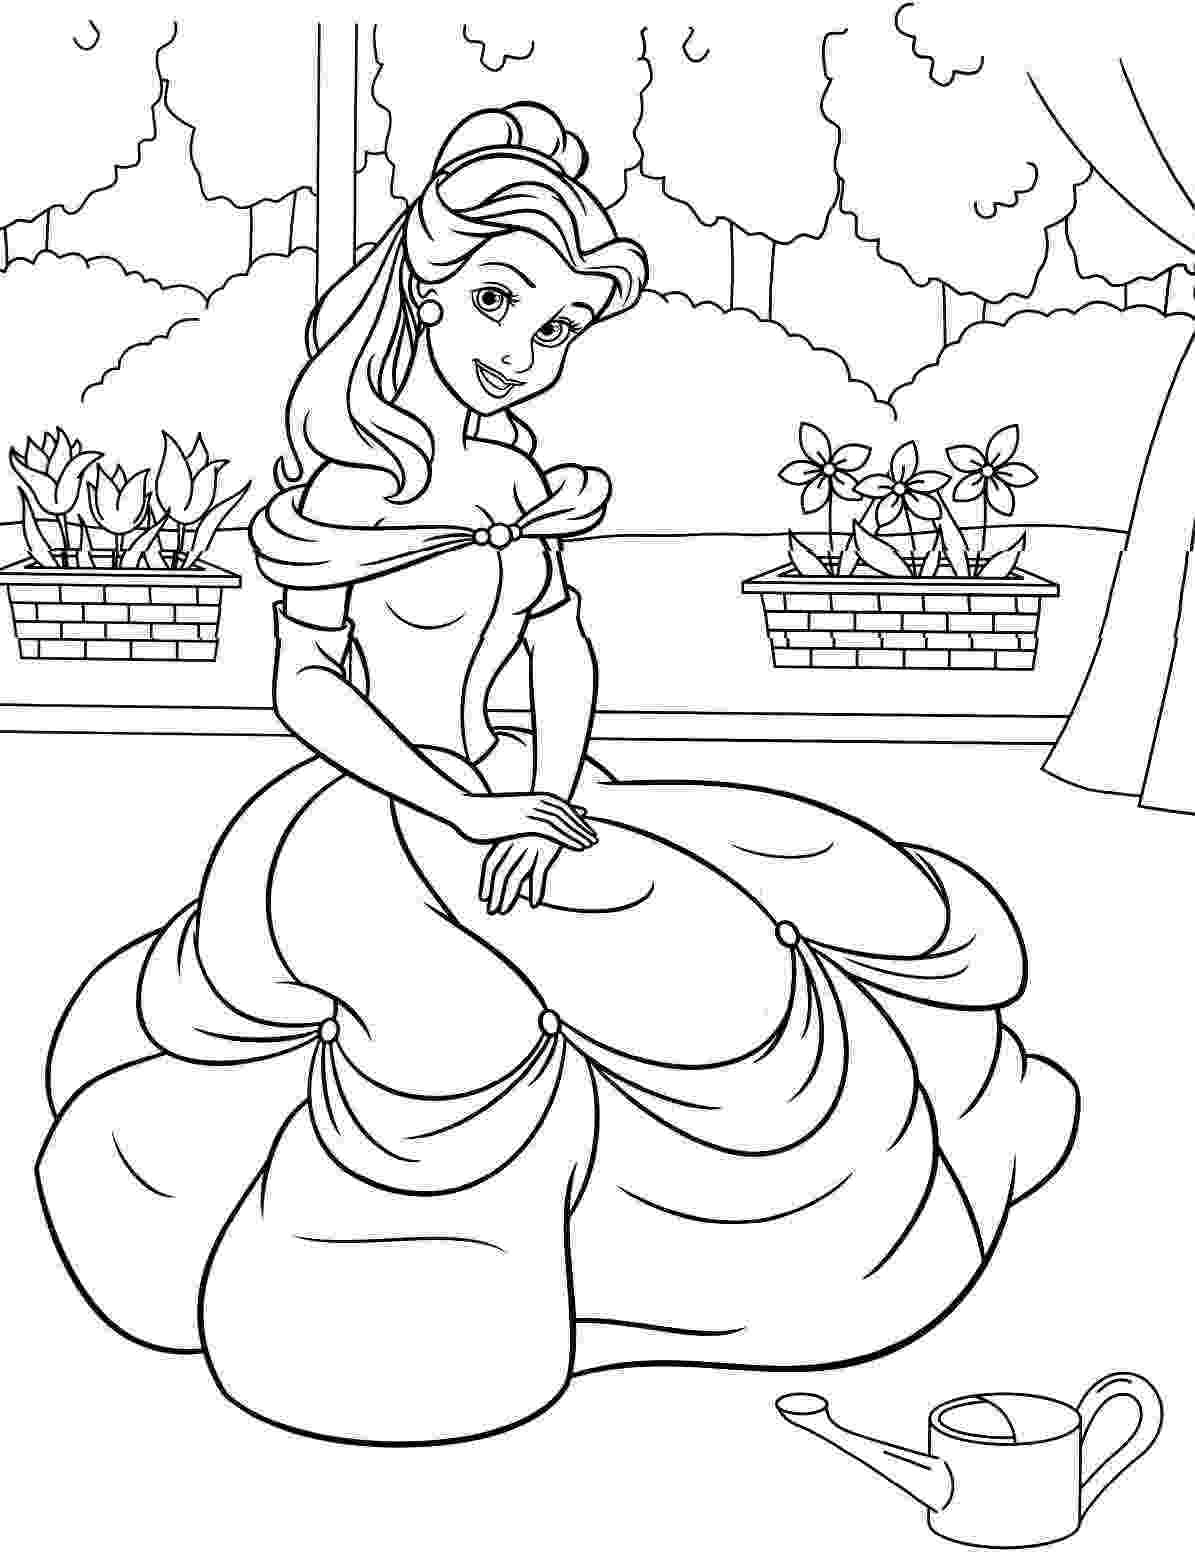 belle pictures to color free printable belle coloring pages for kids belle pictures color to 